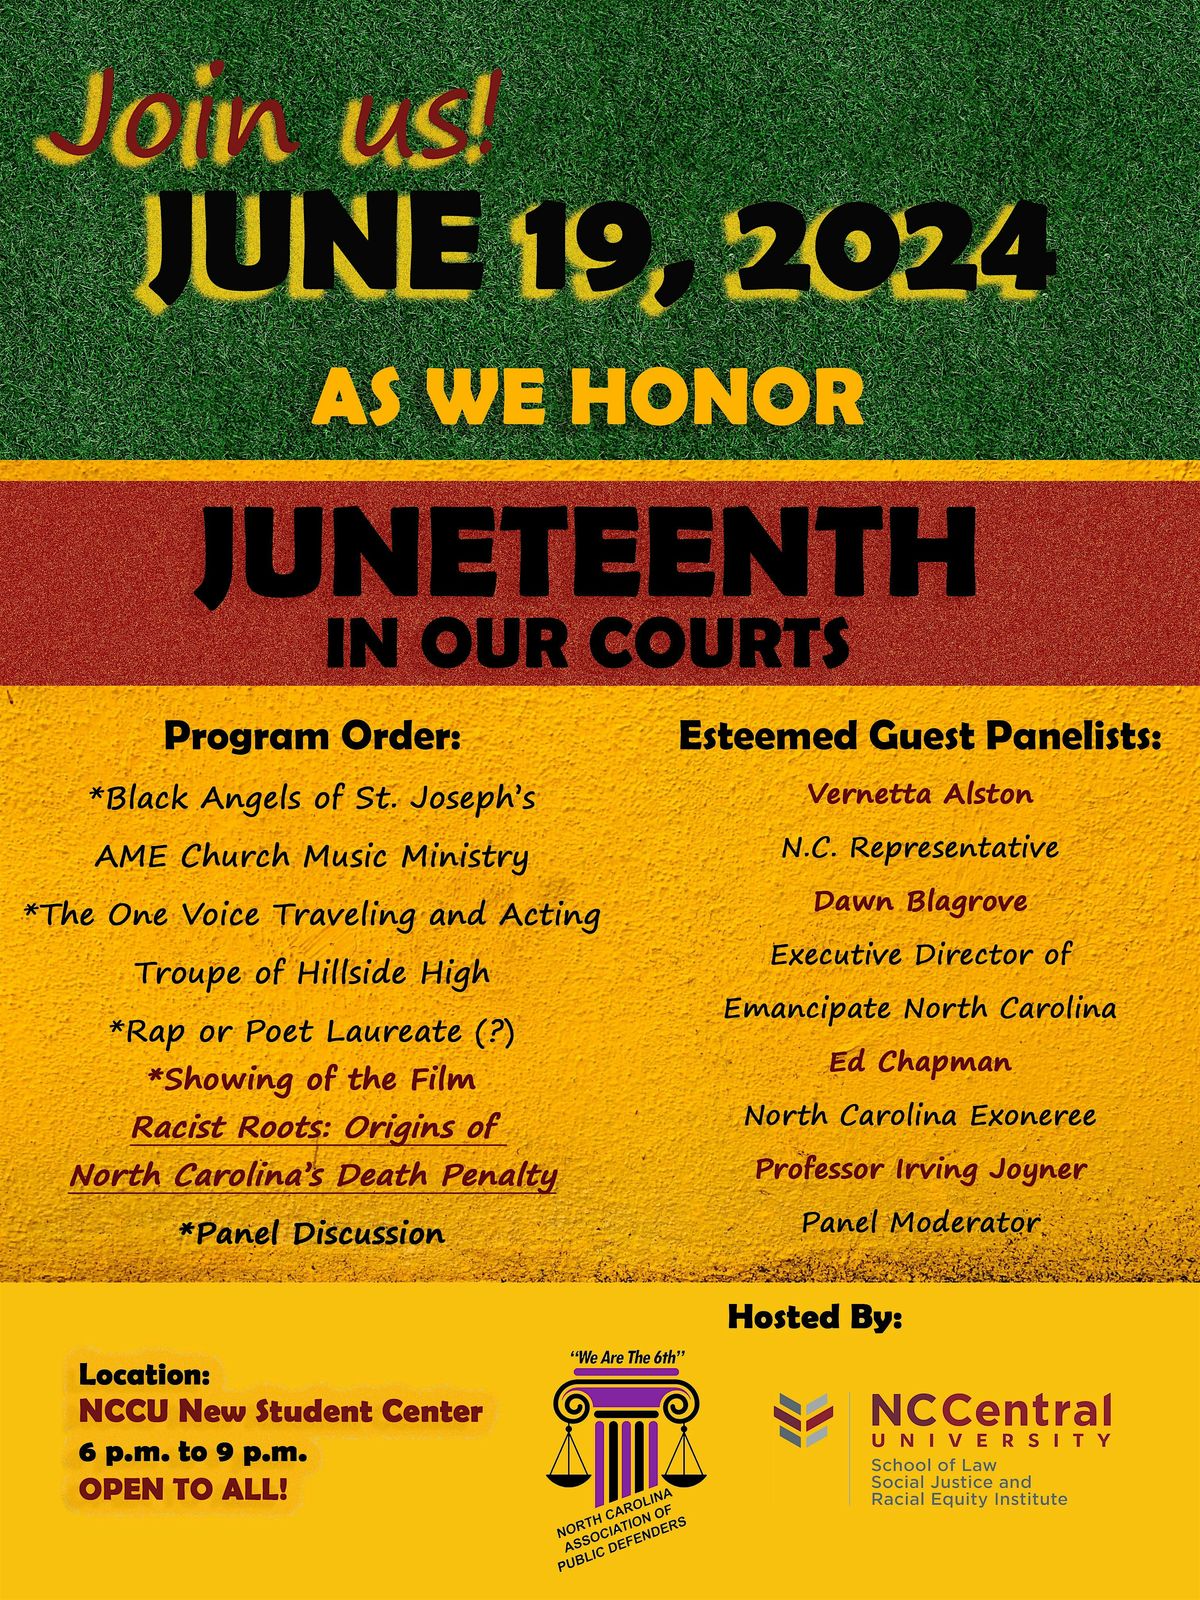 Juneteenth In Our Courts